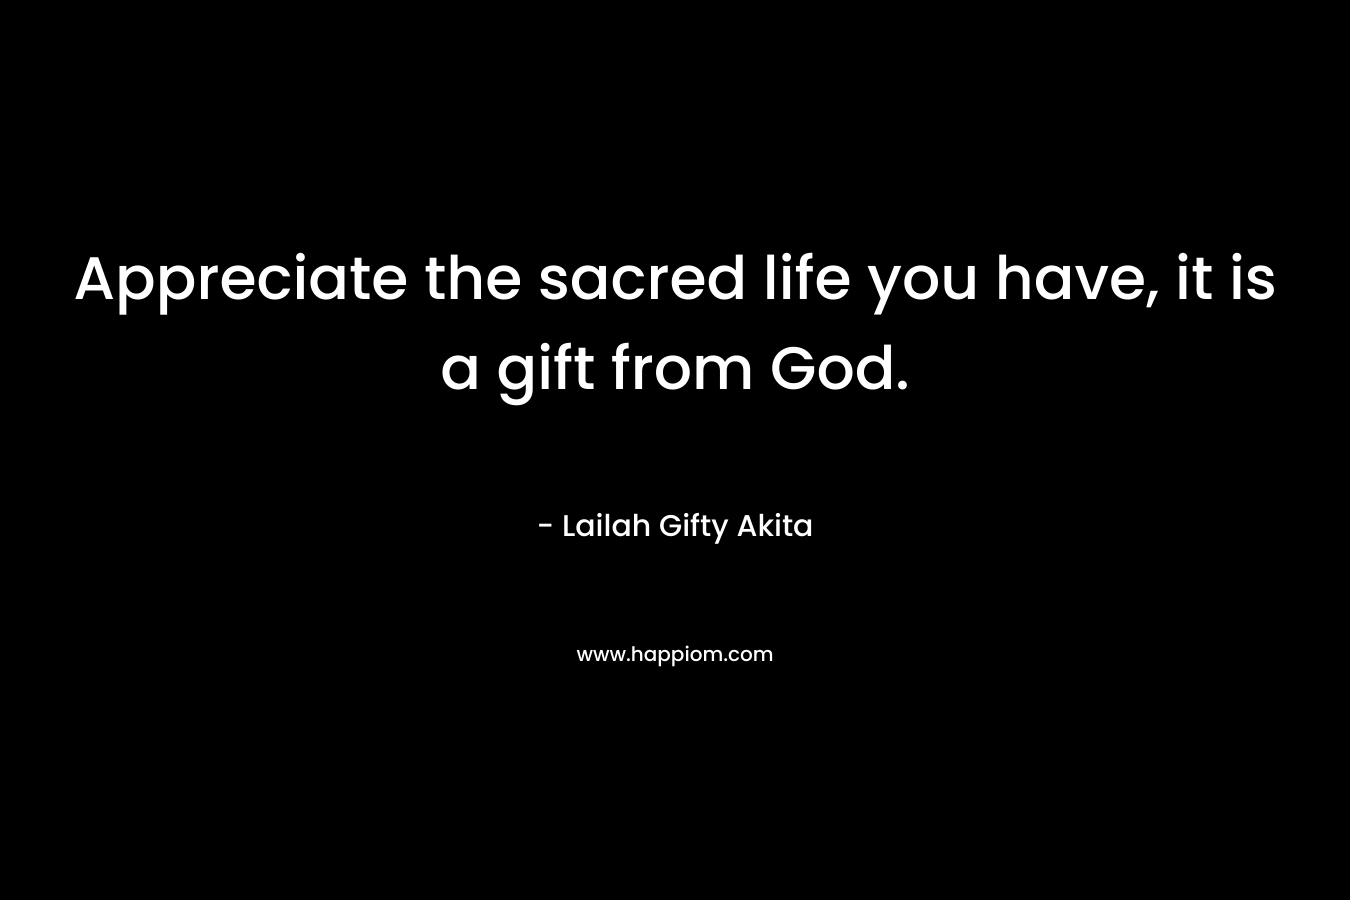 Appreciate the sacred life you have, it is a gift from God.